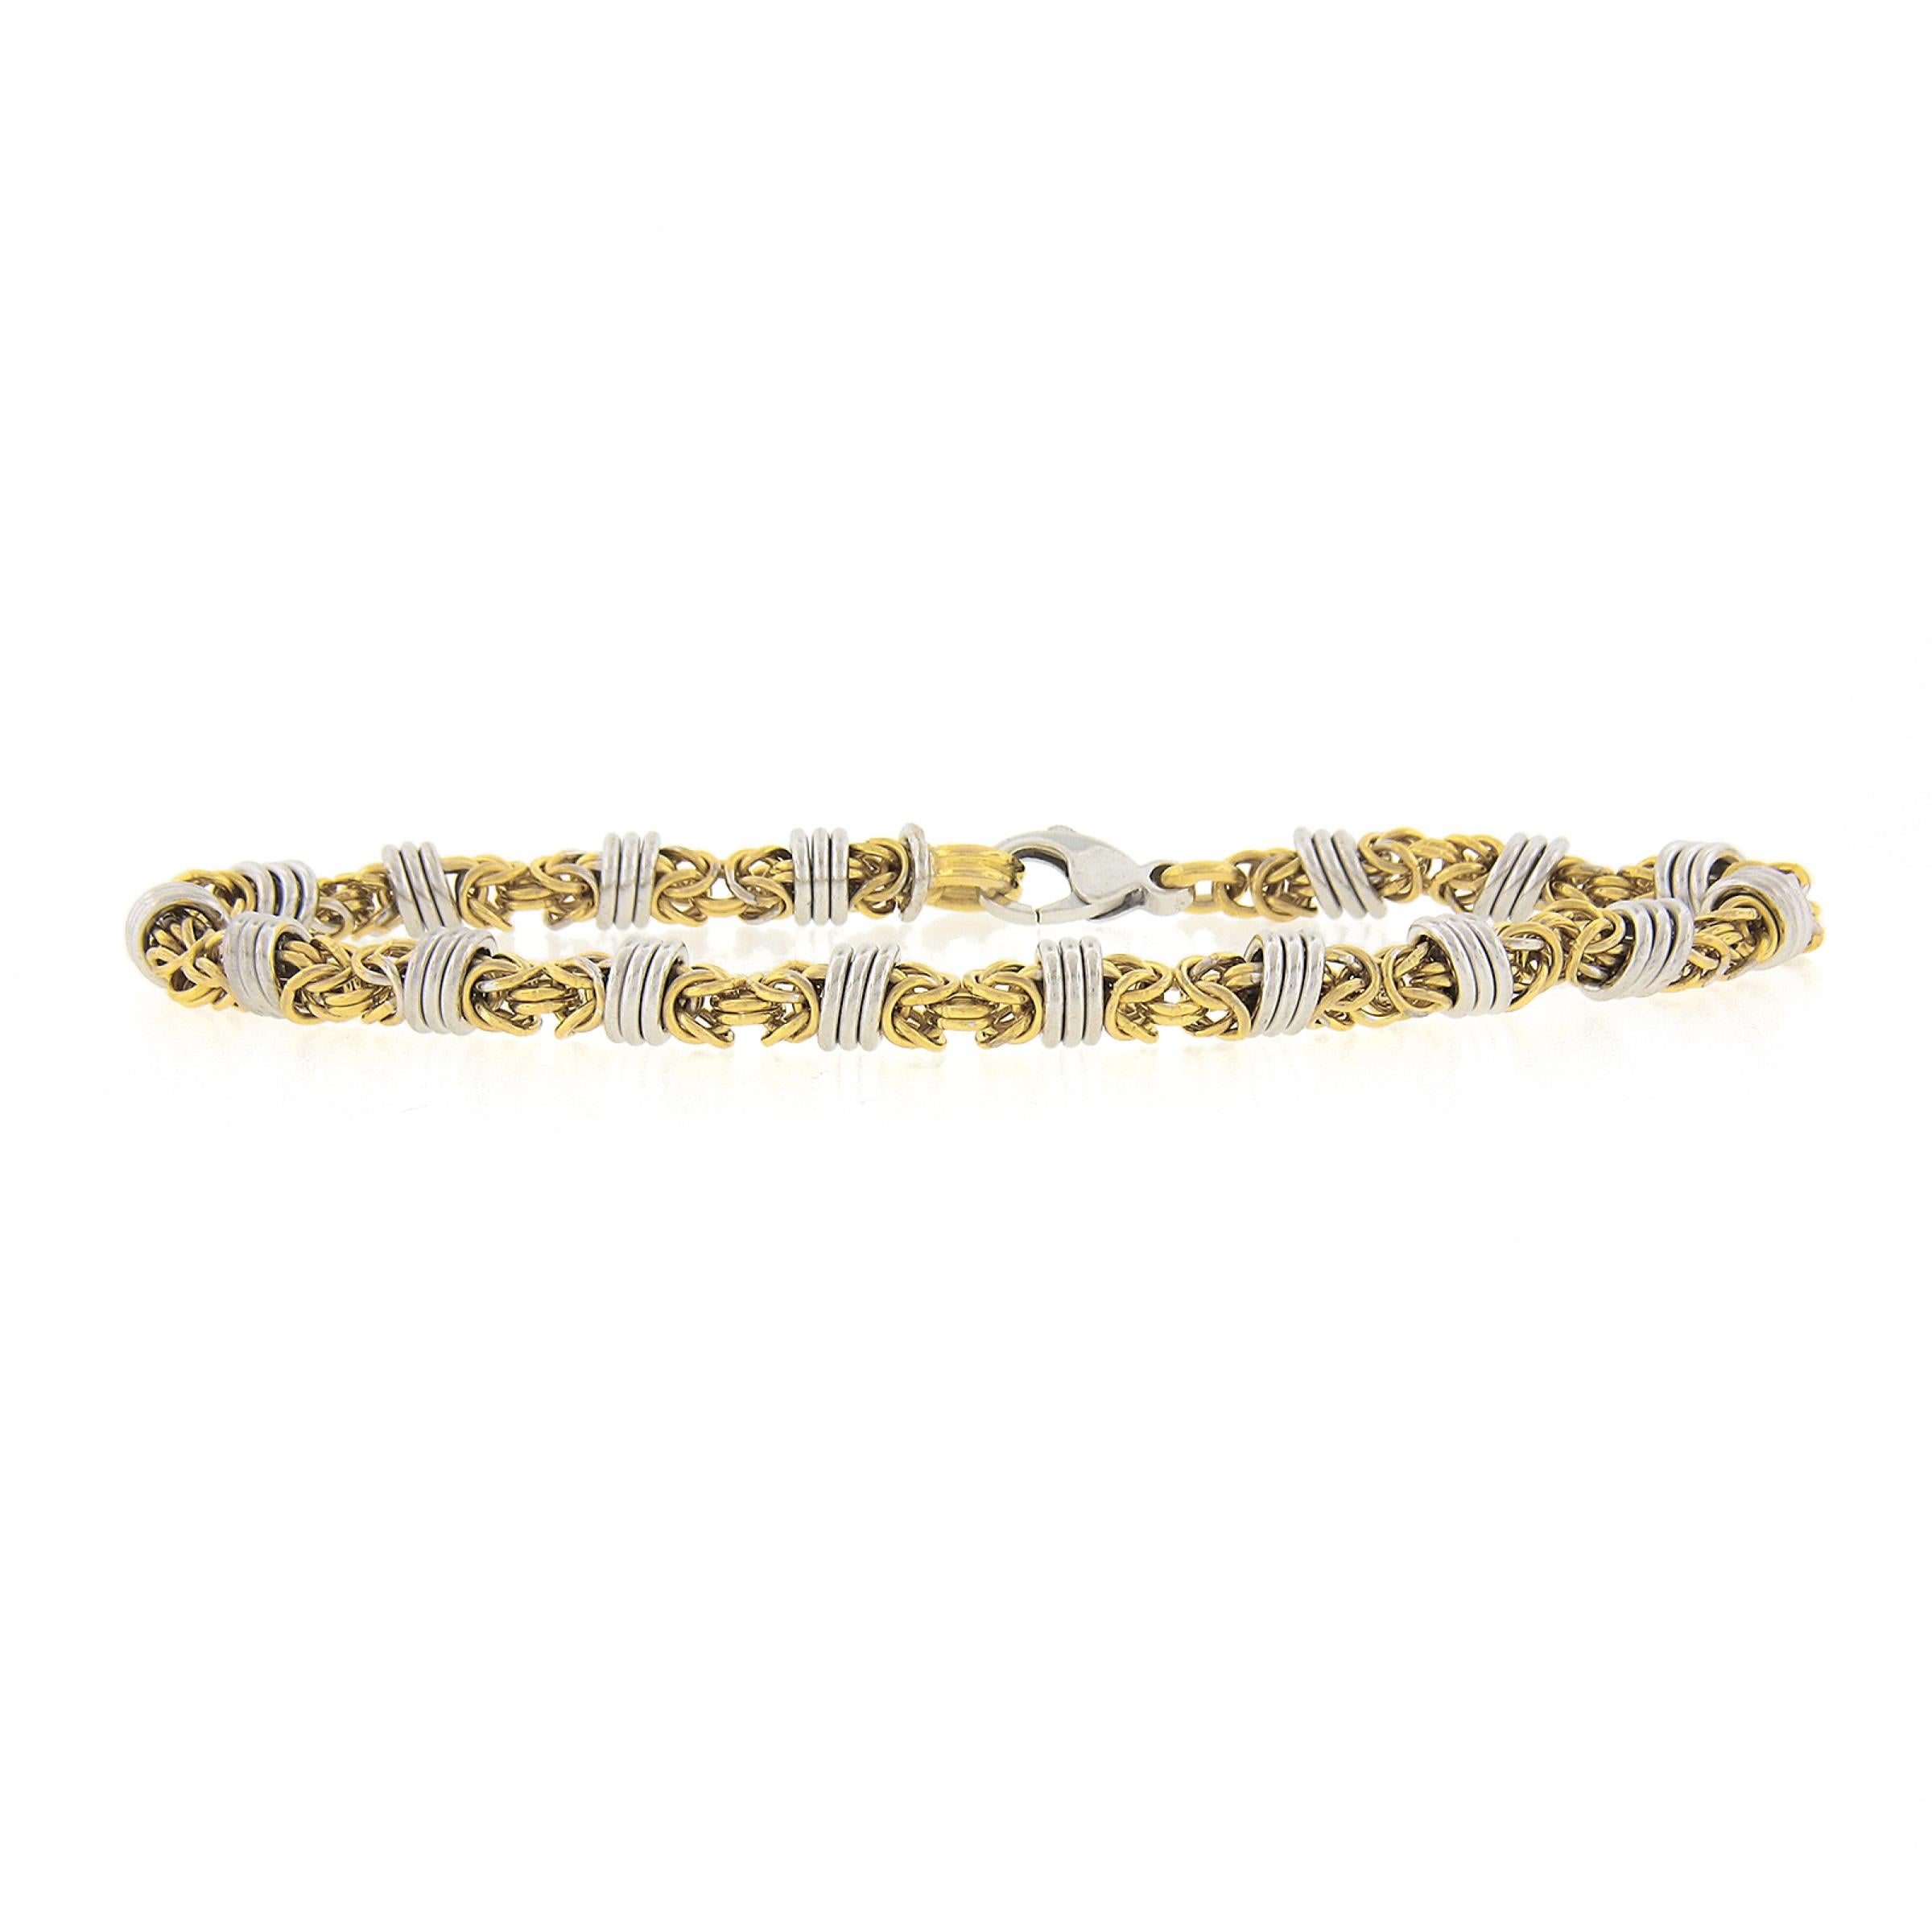 This unique and very well made byzantine link chain bracelet is crafted in solid 14k yellow gold with white gold circle links evenly spaced throughout. The bracelet measures 5.8mm wide and has a wonderful high polished finishing throughout, securing